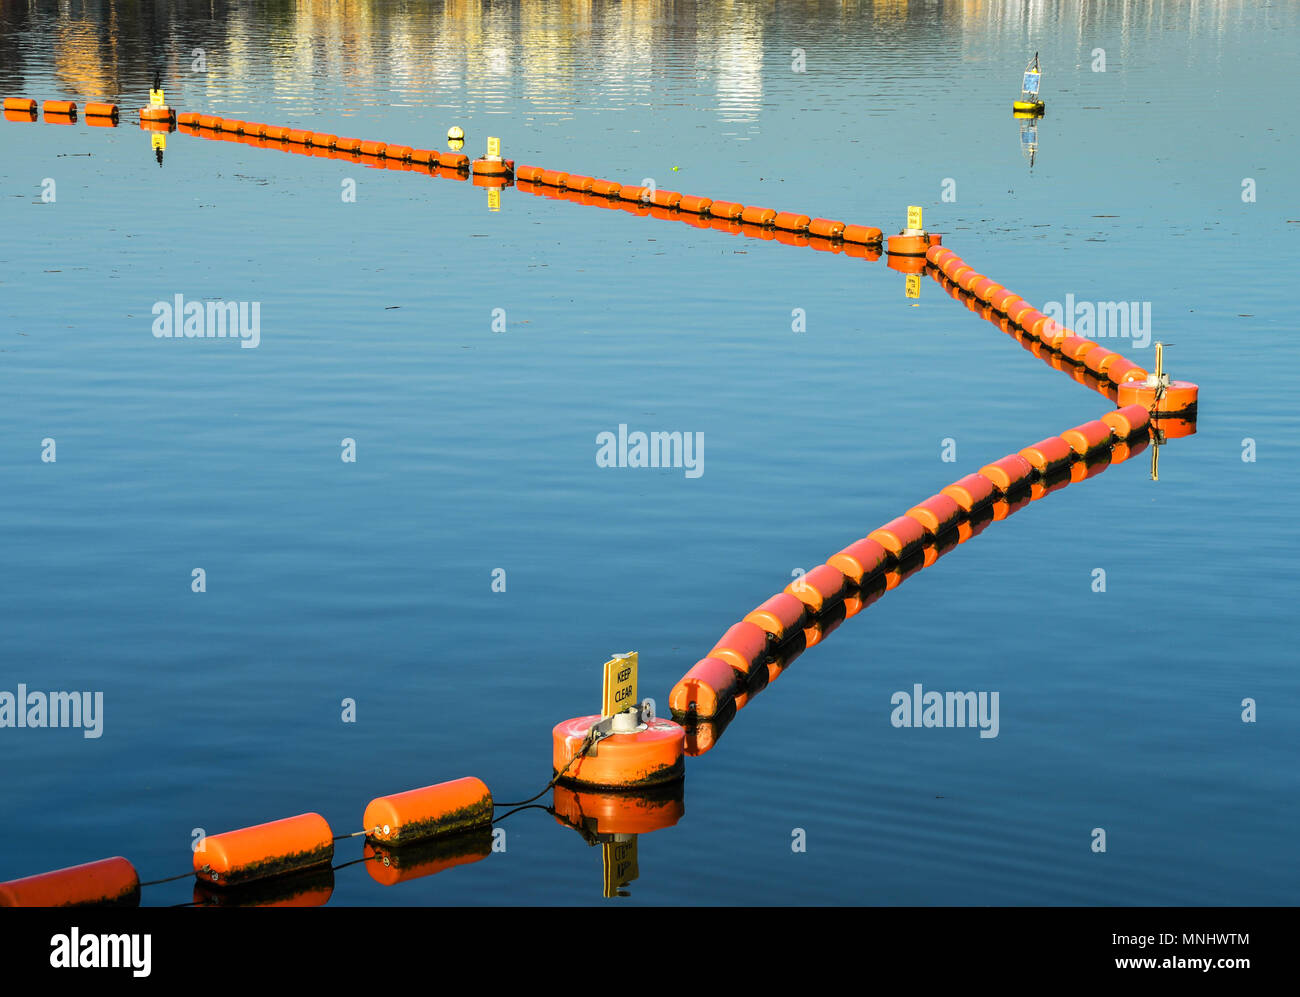 Bright orange floats in early morning light. They form a protective barrier in Cardiff Bay to keep boats away from the sluice gates on the barrage Stock Photo